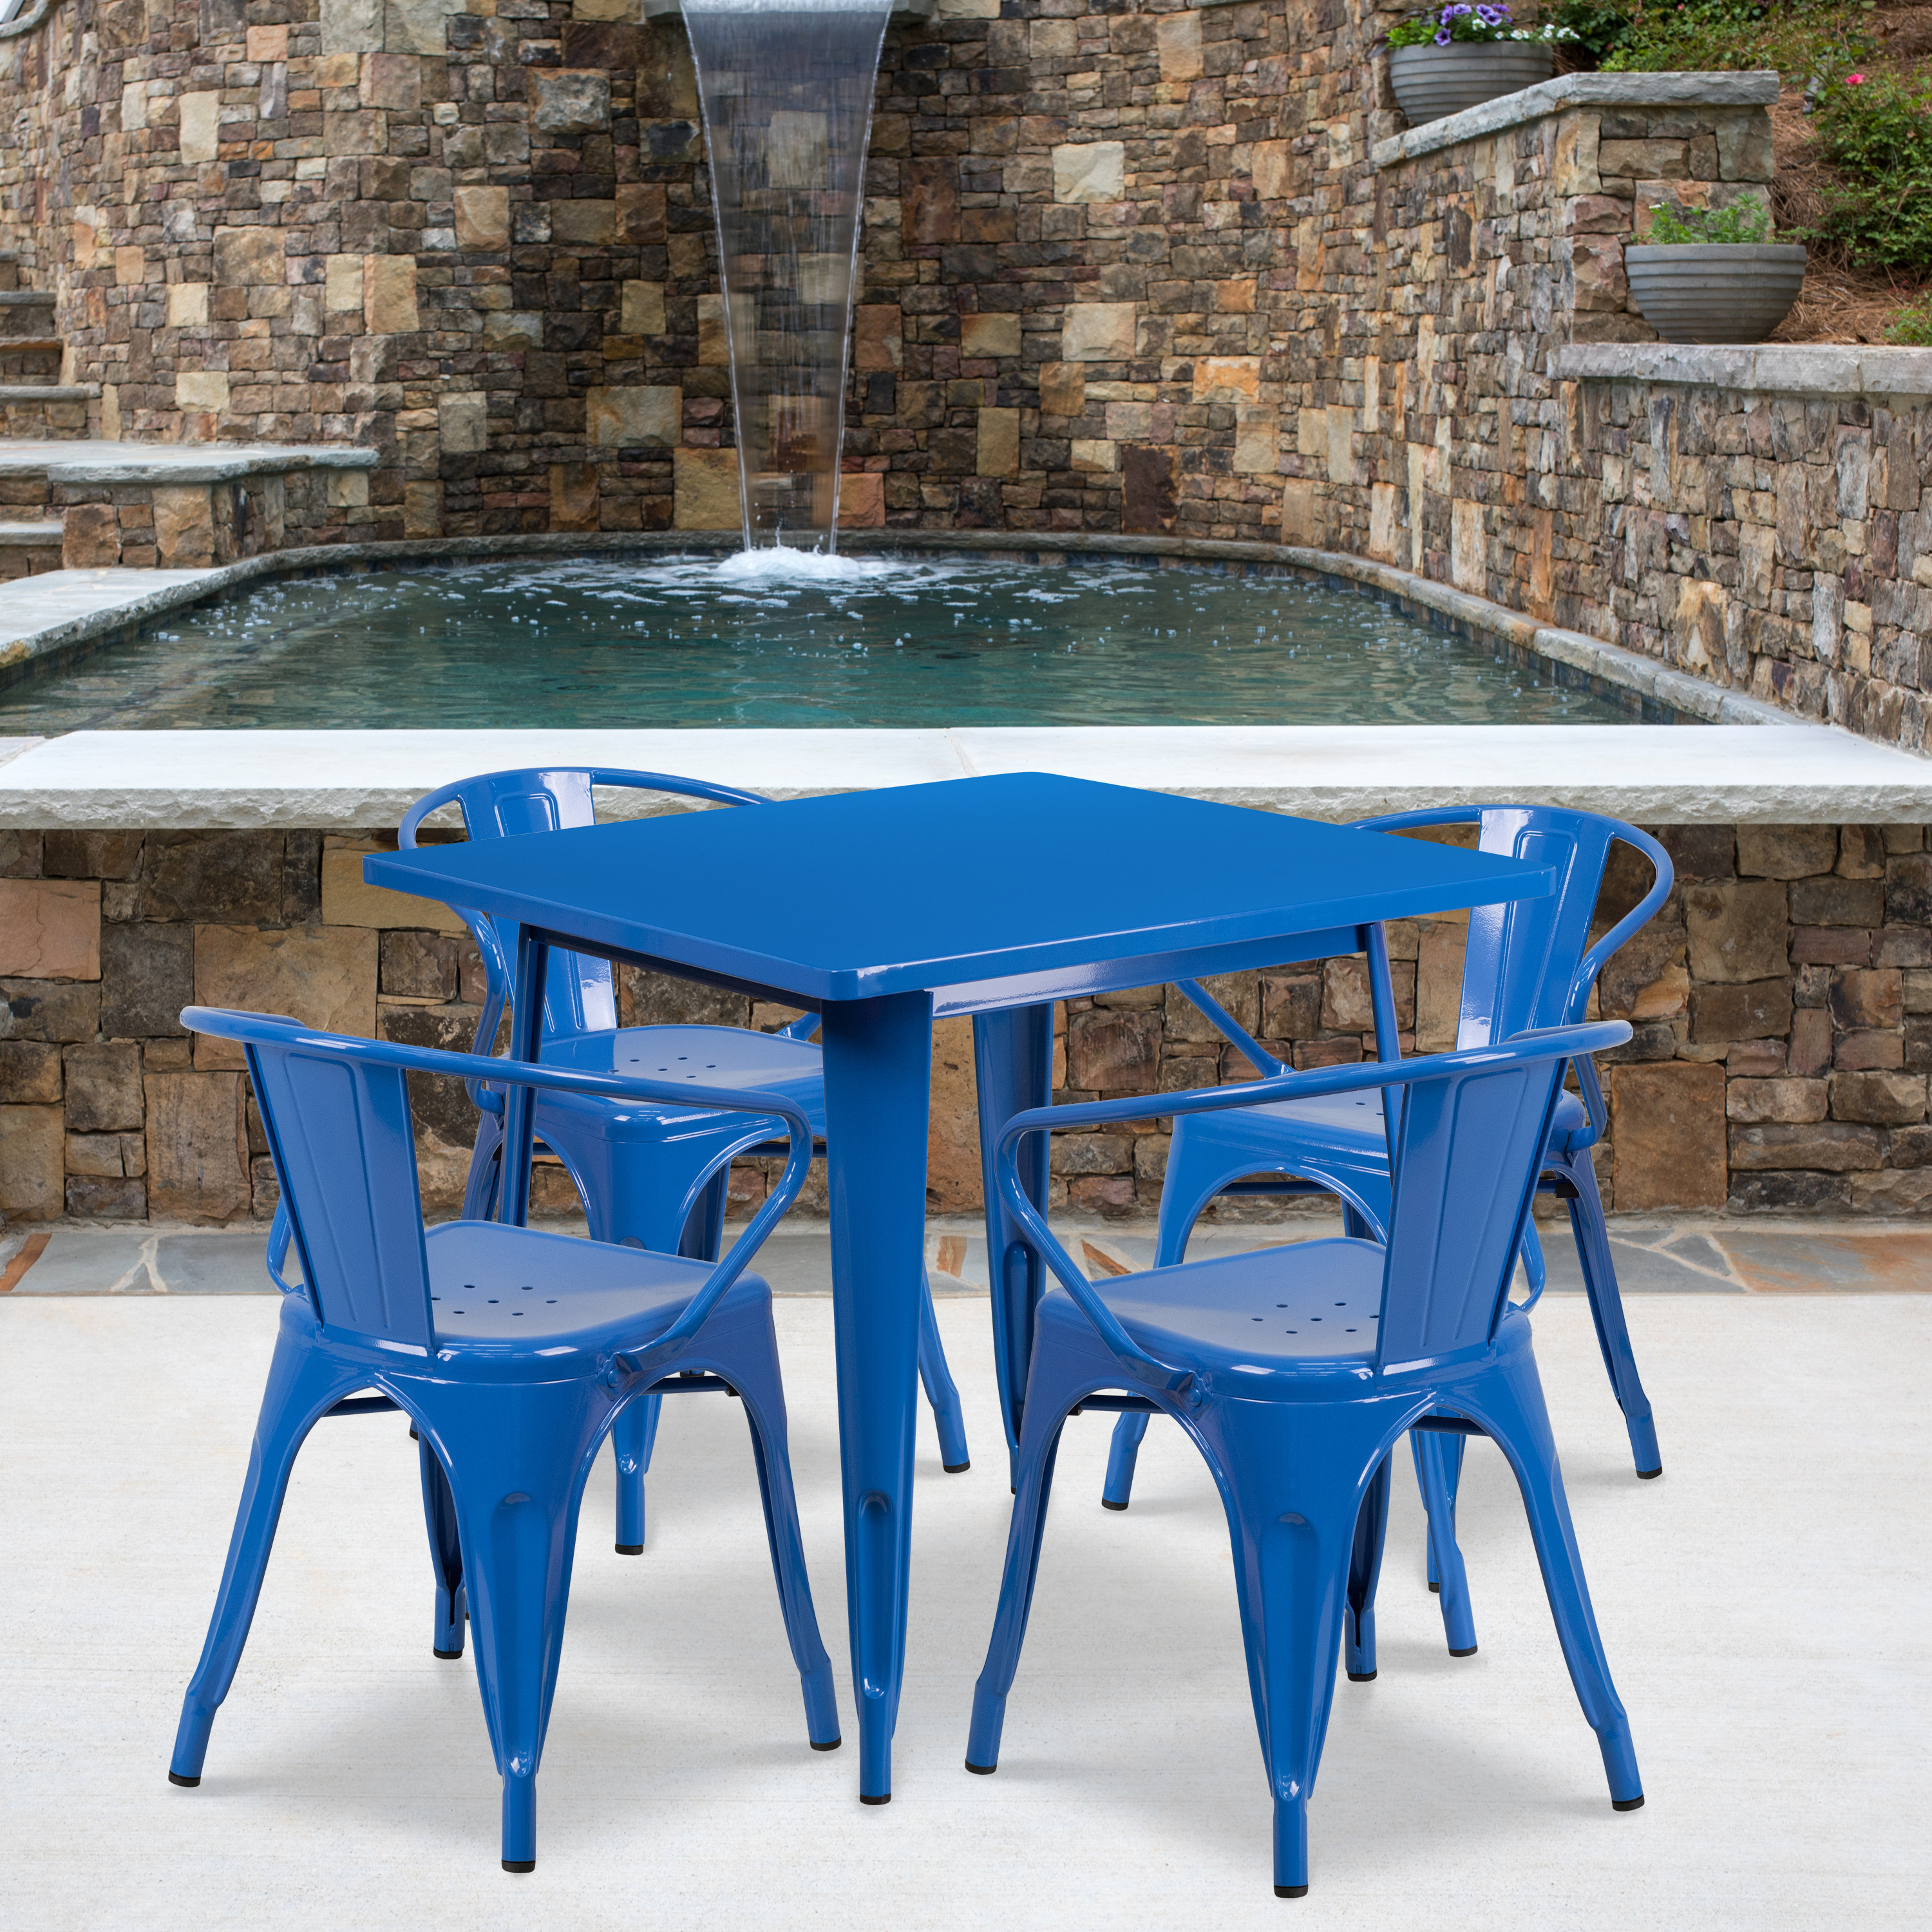 Flash Furniture Commercial Grade 31.5" Square Blue Metal Indoor-Outdoor Table Set with 4 Arm Chairs - image 1 of 5